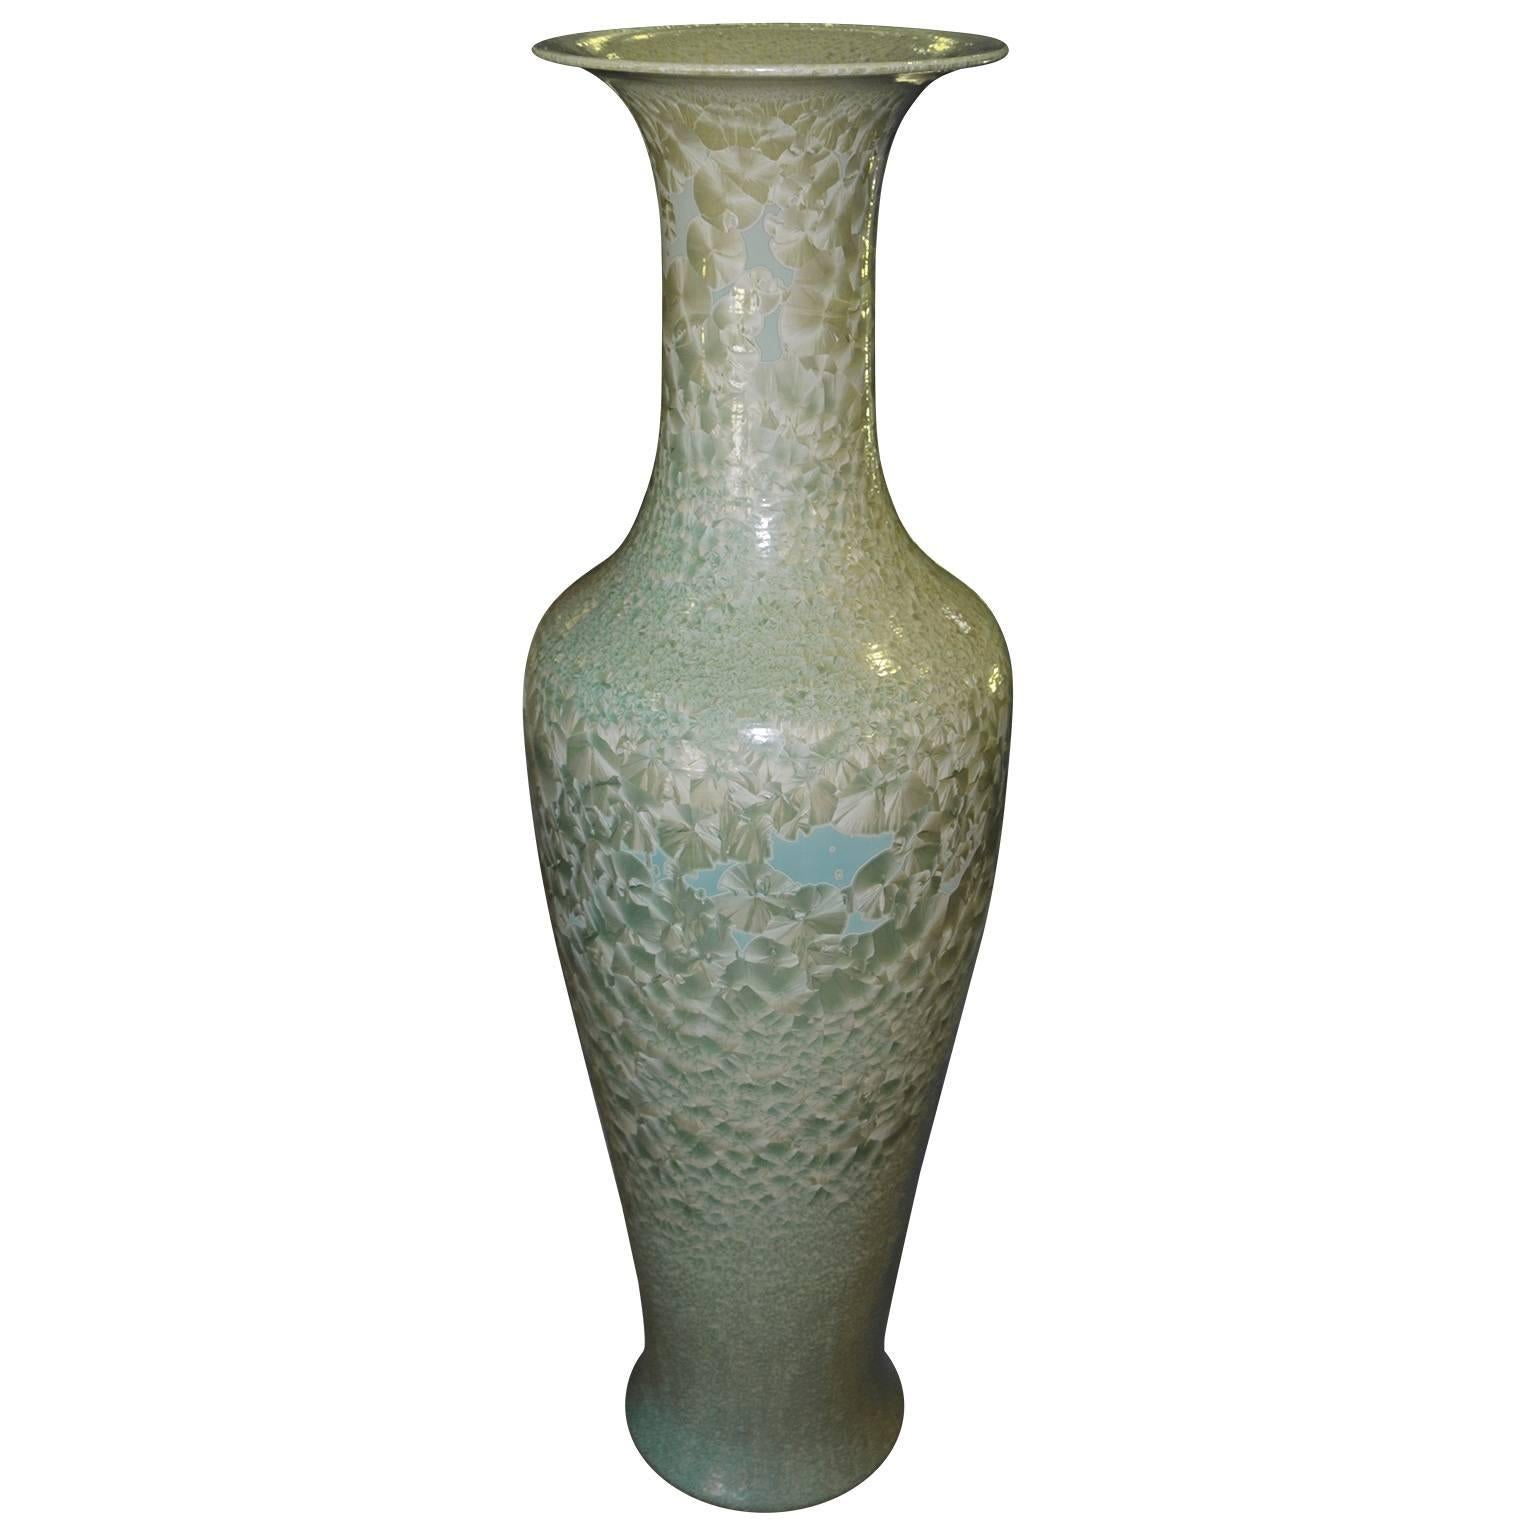 Set of three tall Celadon porcelain floor vases made in Hong Kong. These beautiful vases have different shades of light blue and light mint green through out the entire vase. The exterior is hand painted and glazed. Each vase is different in shape